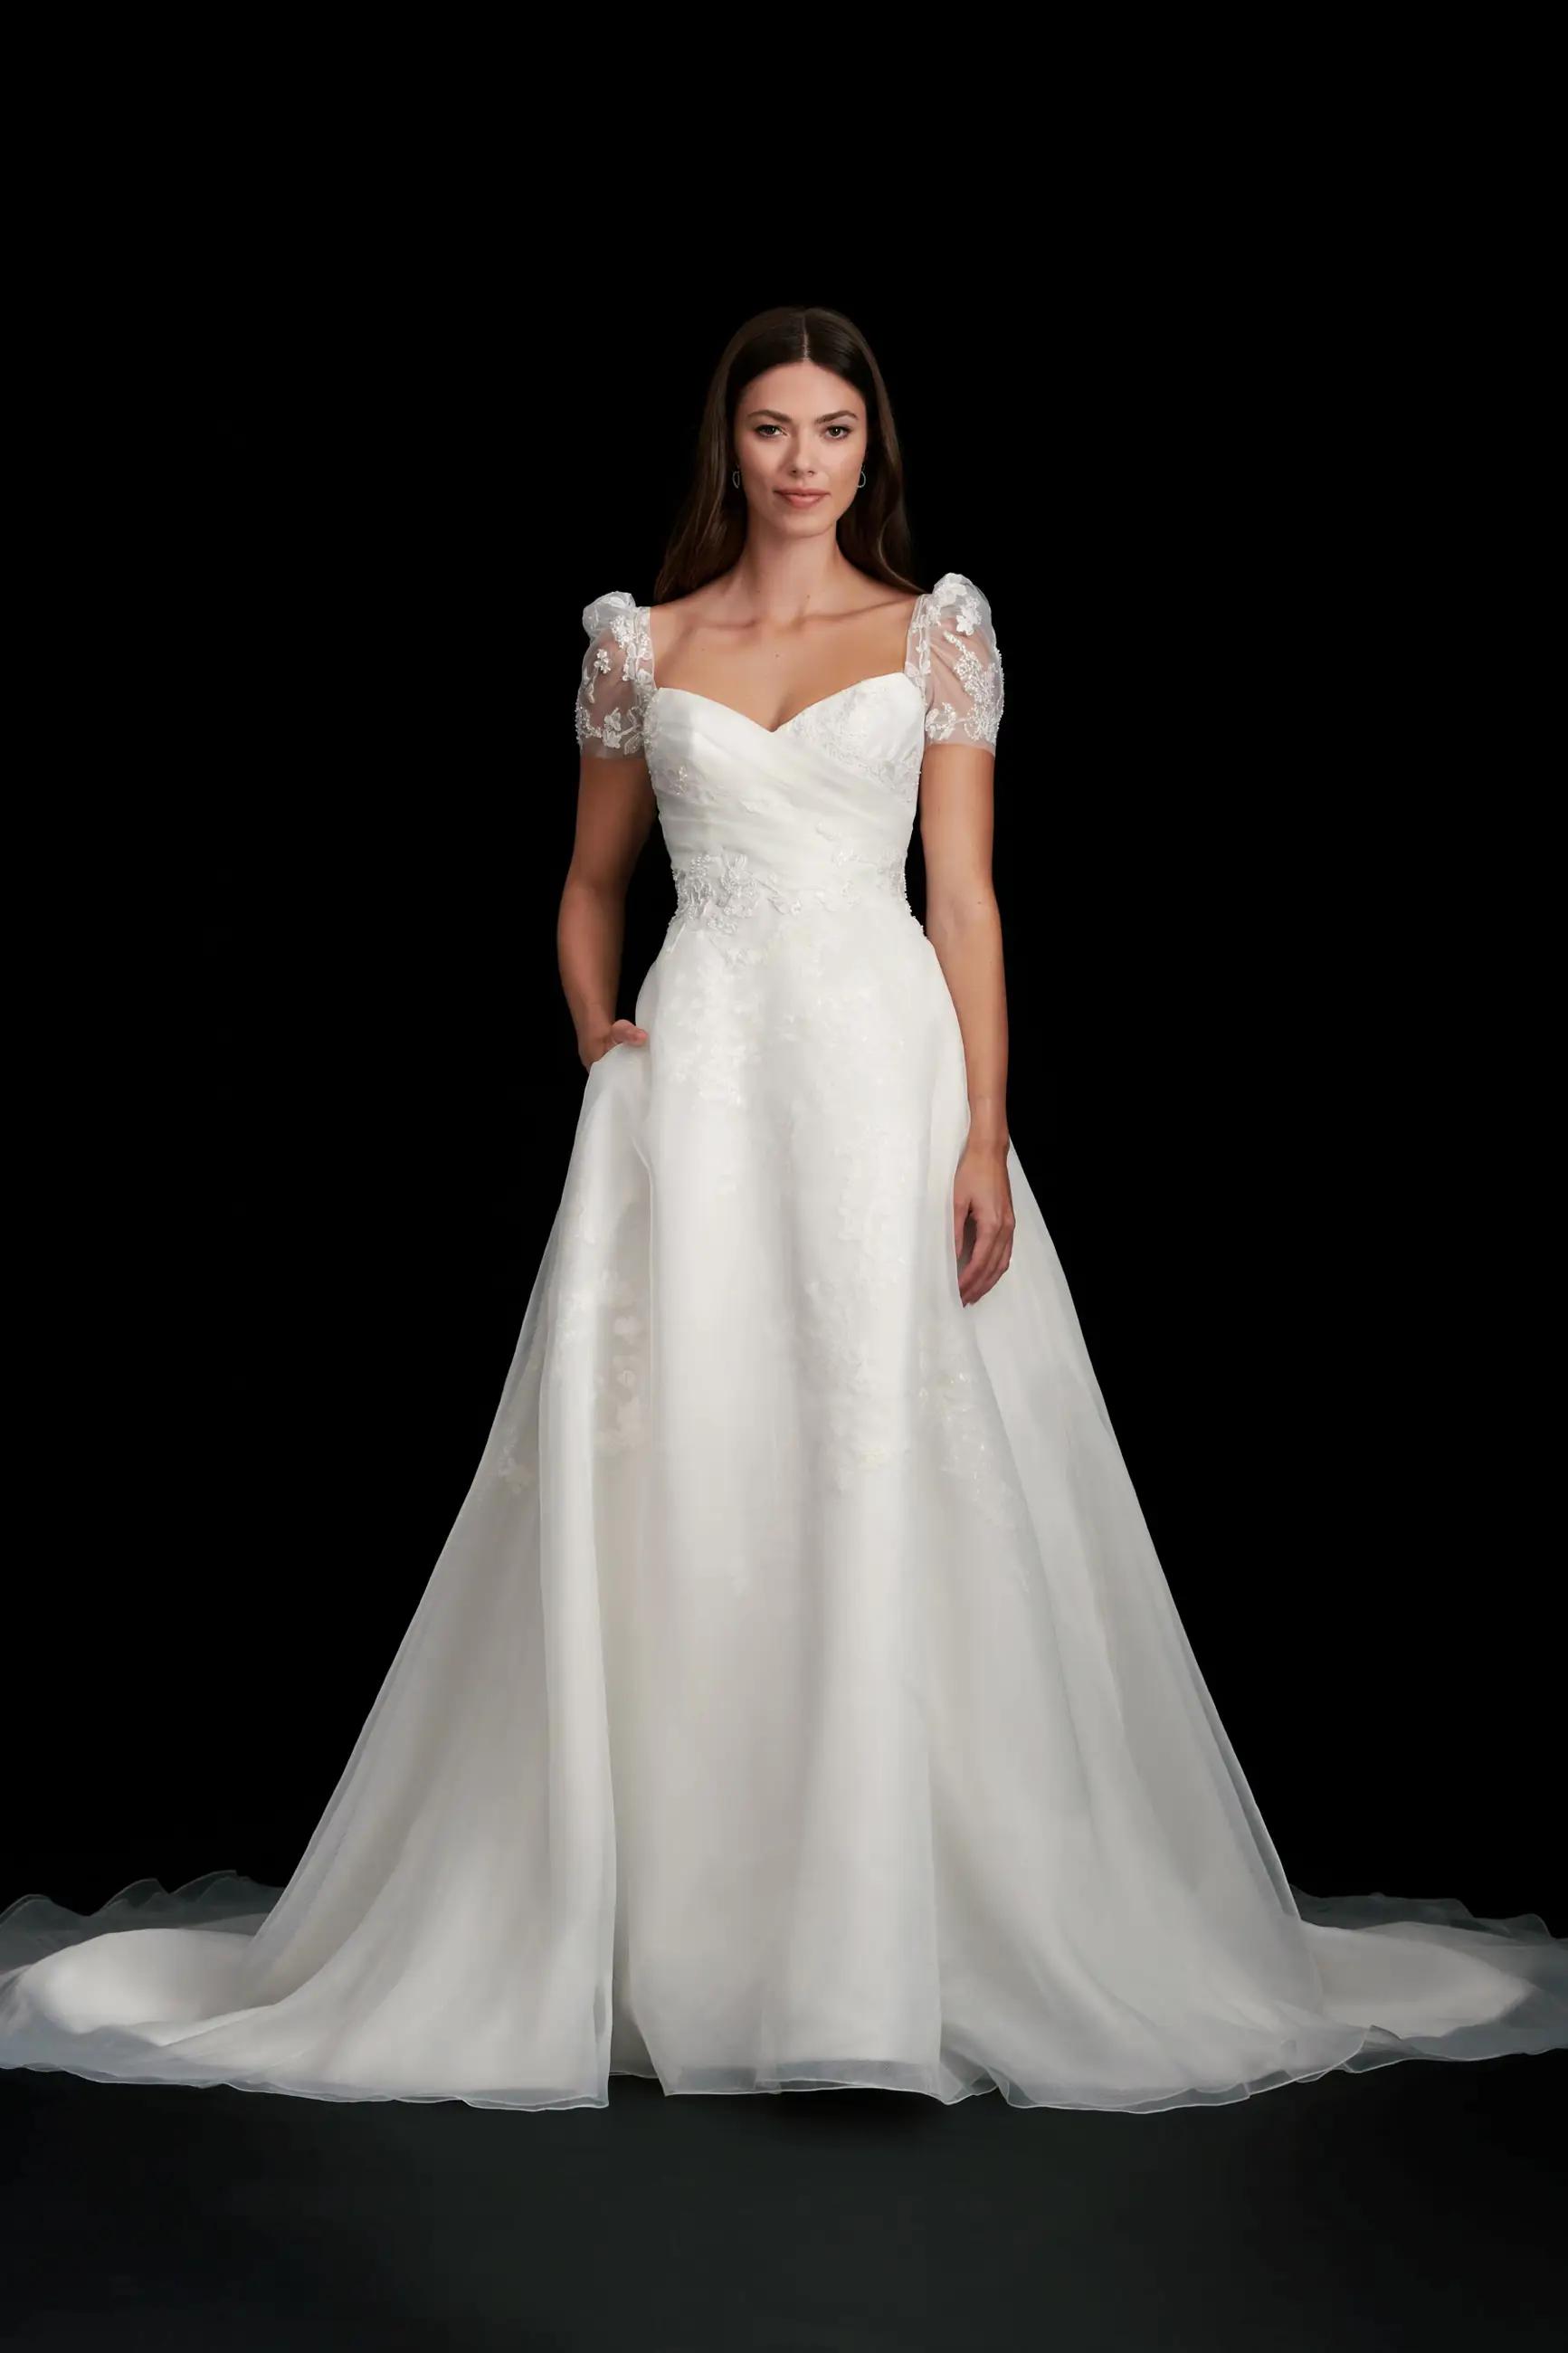 Camilla wedding dress by Kelly Faetanini with cap sleeves, a line skirt and pleated sweetheart bodice